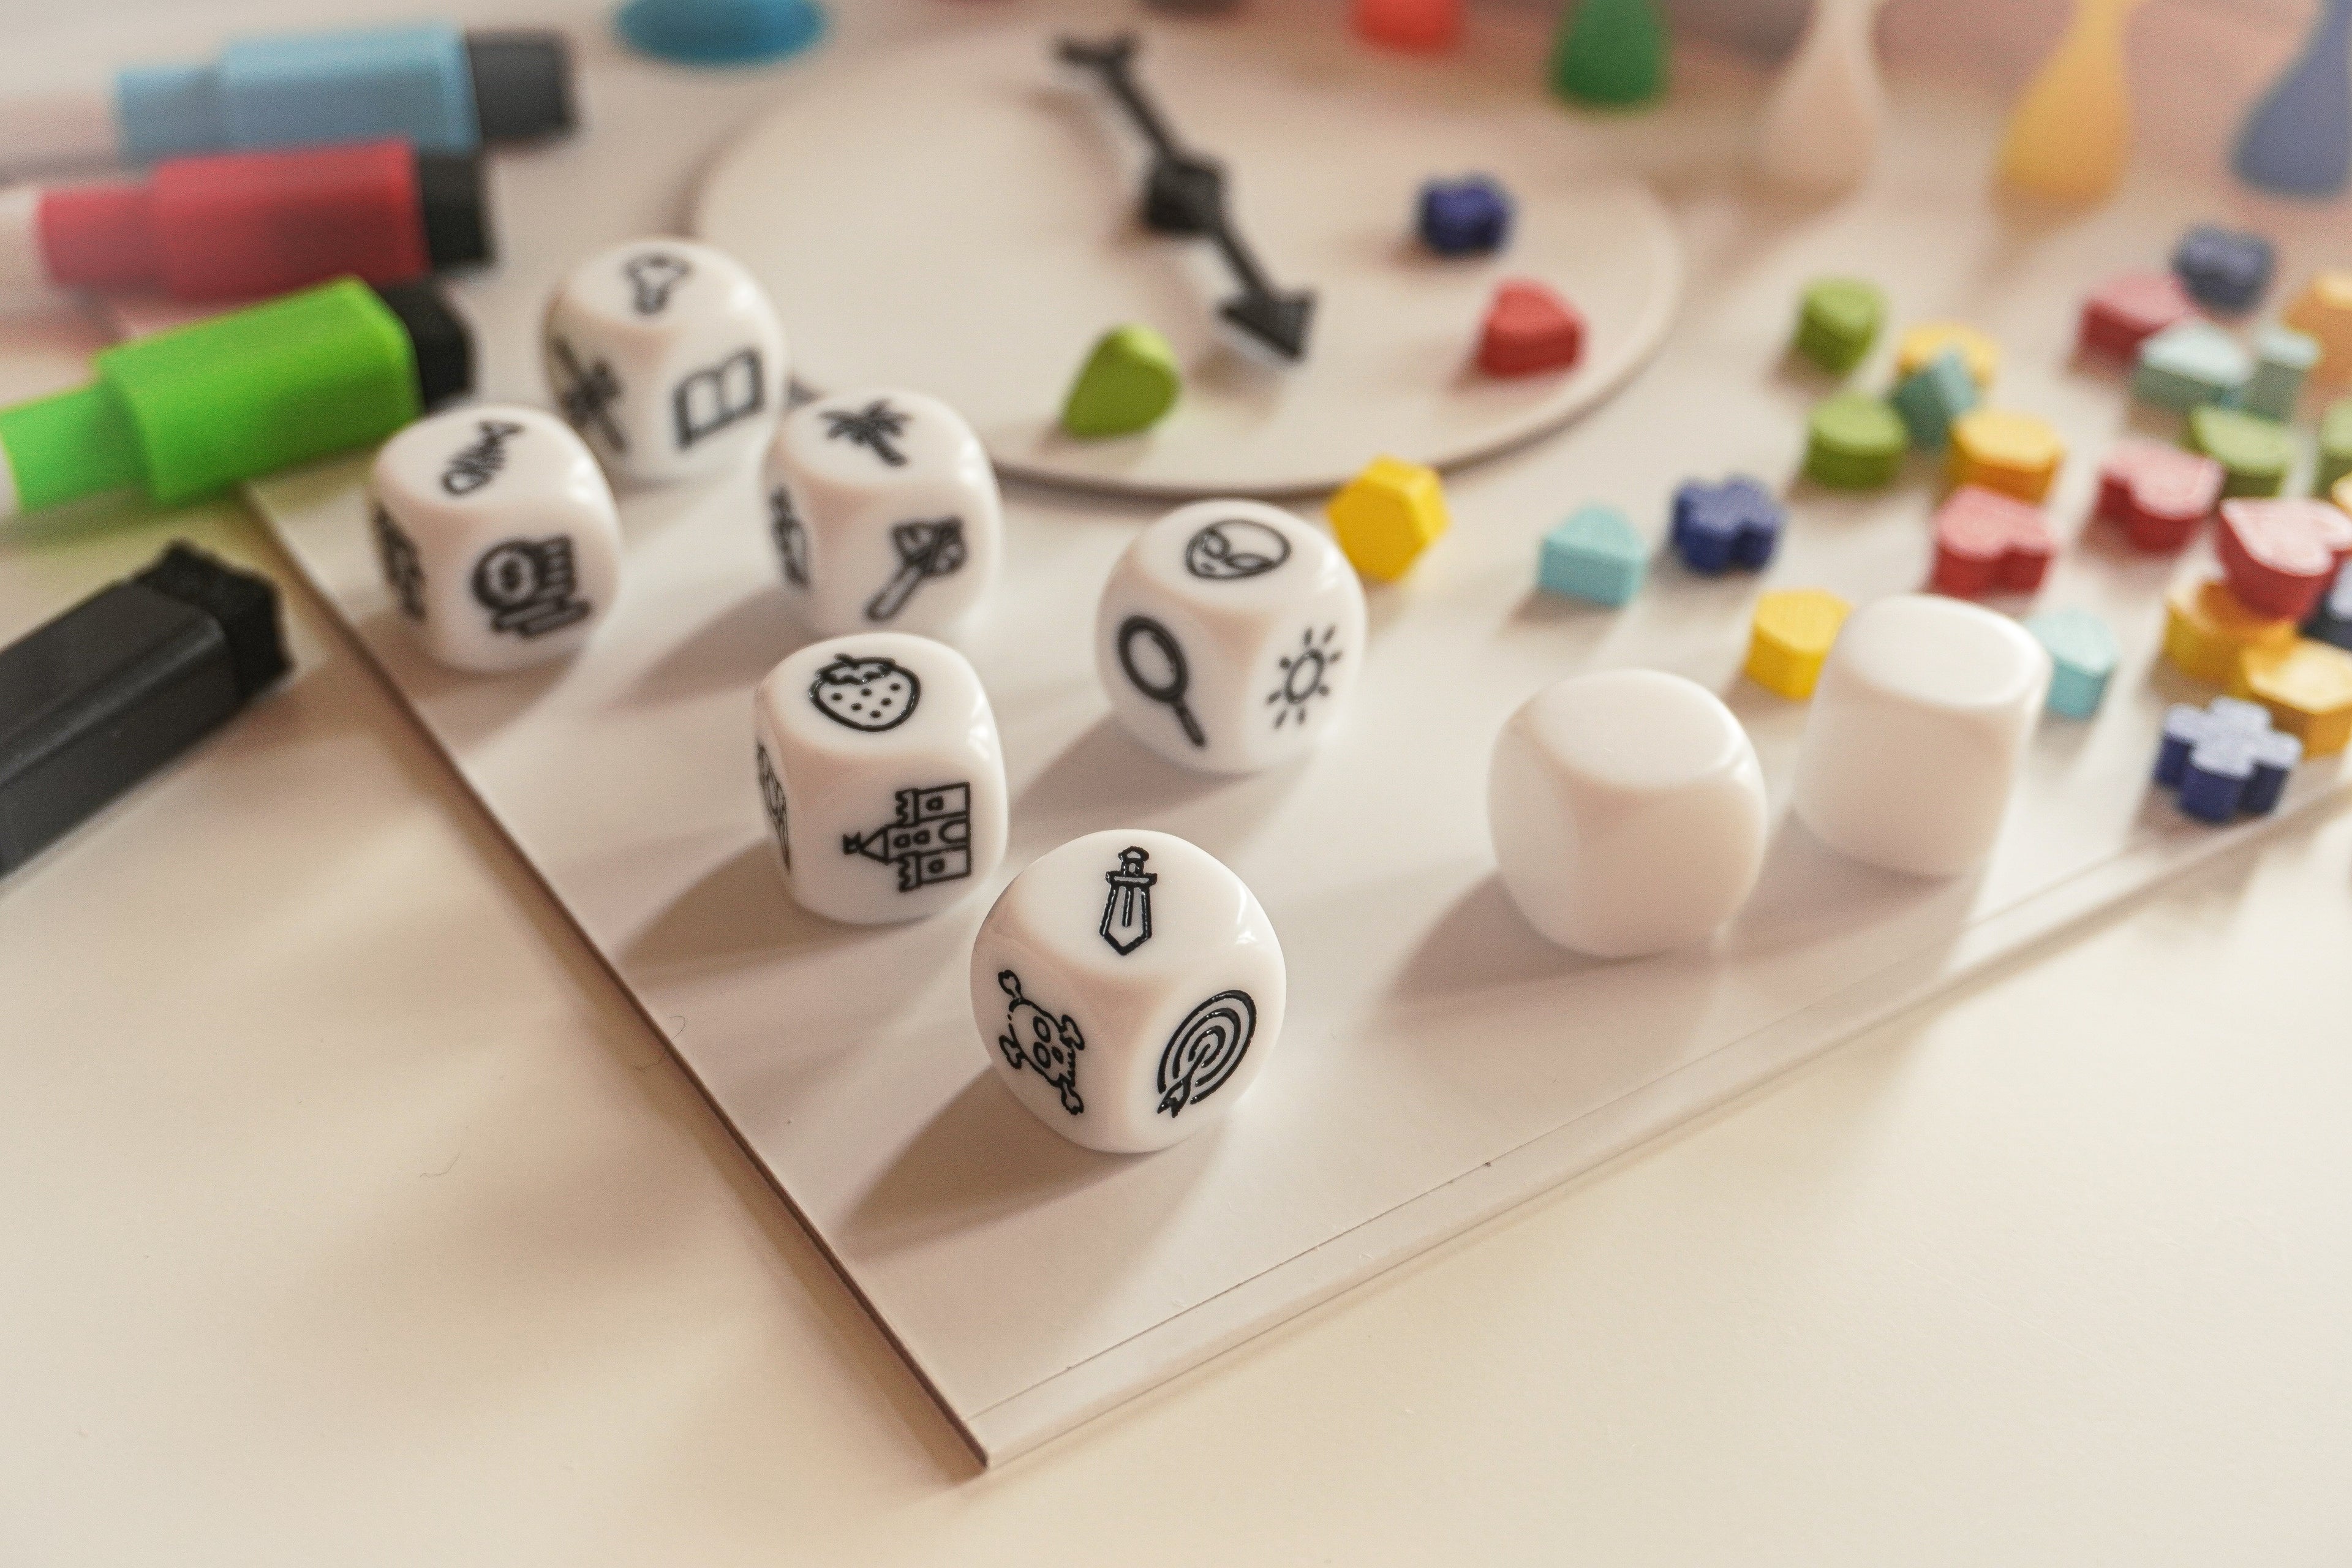 Create your own board game kit